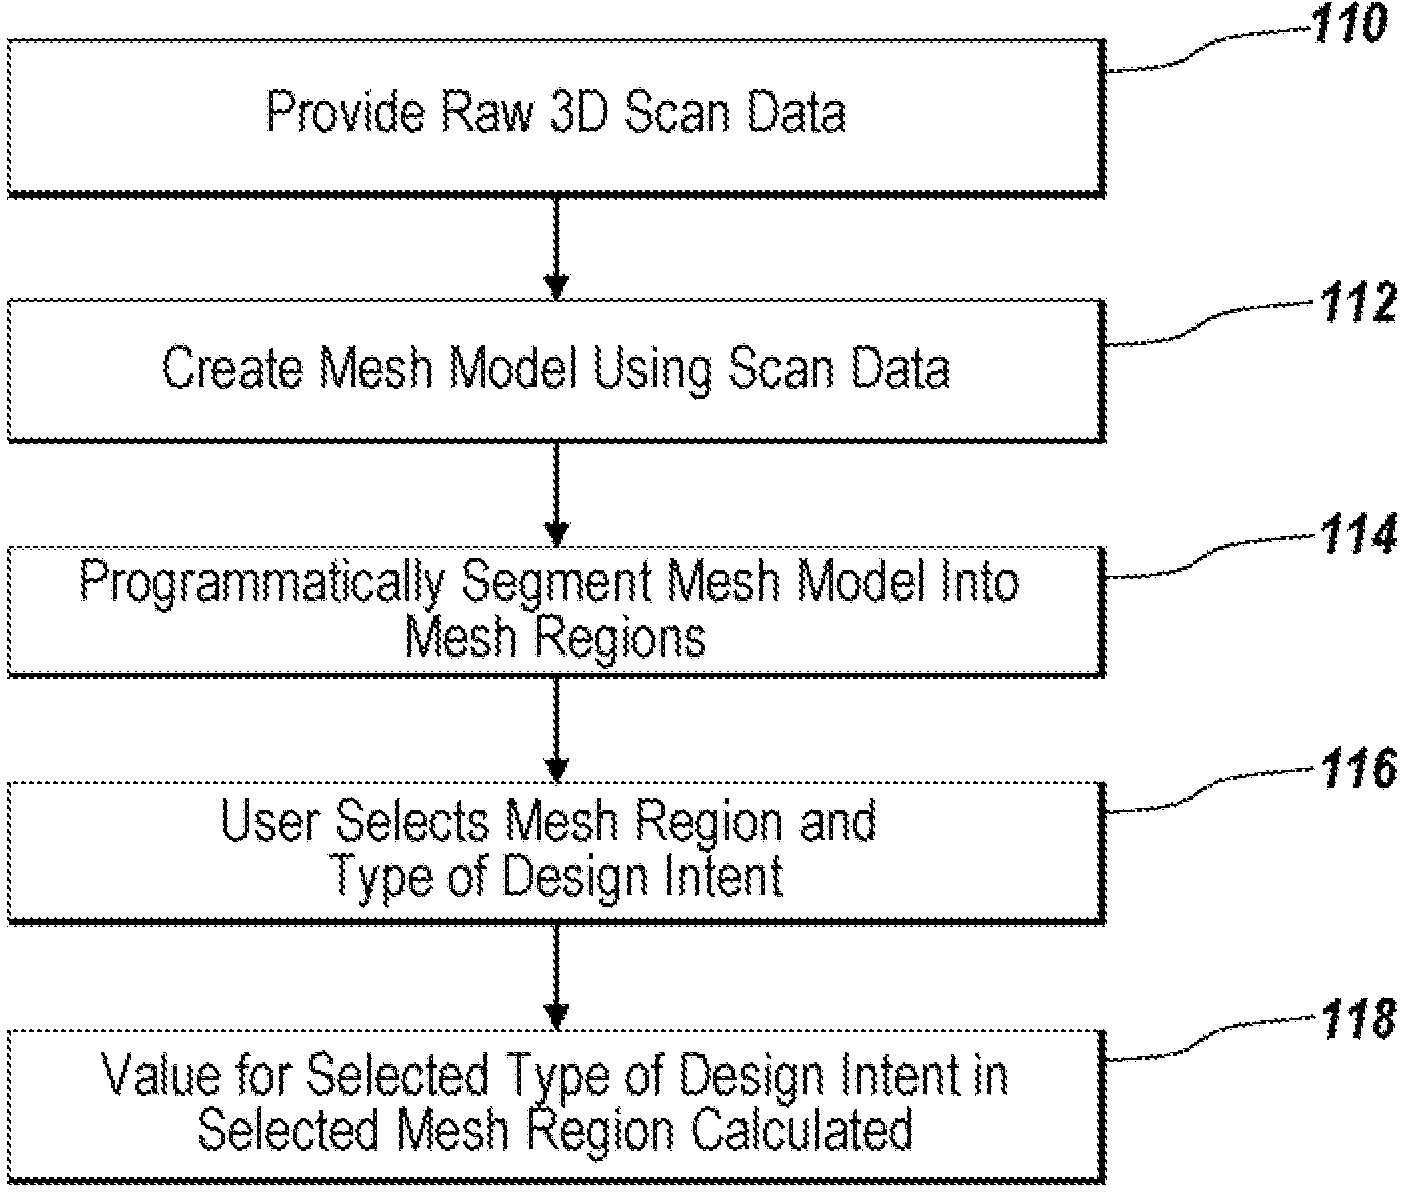 System and method for identifying original design intents using 3D scan data